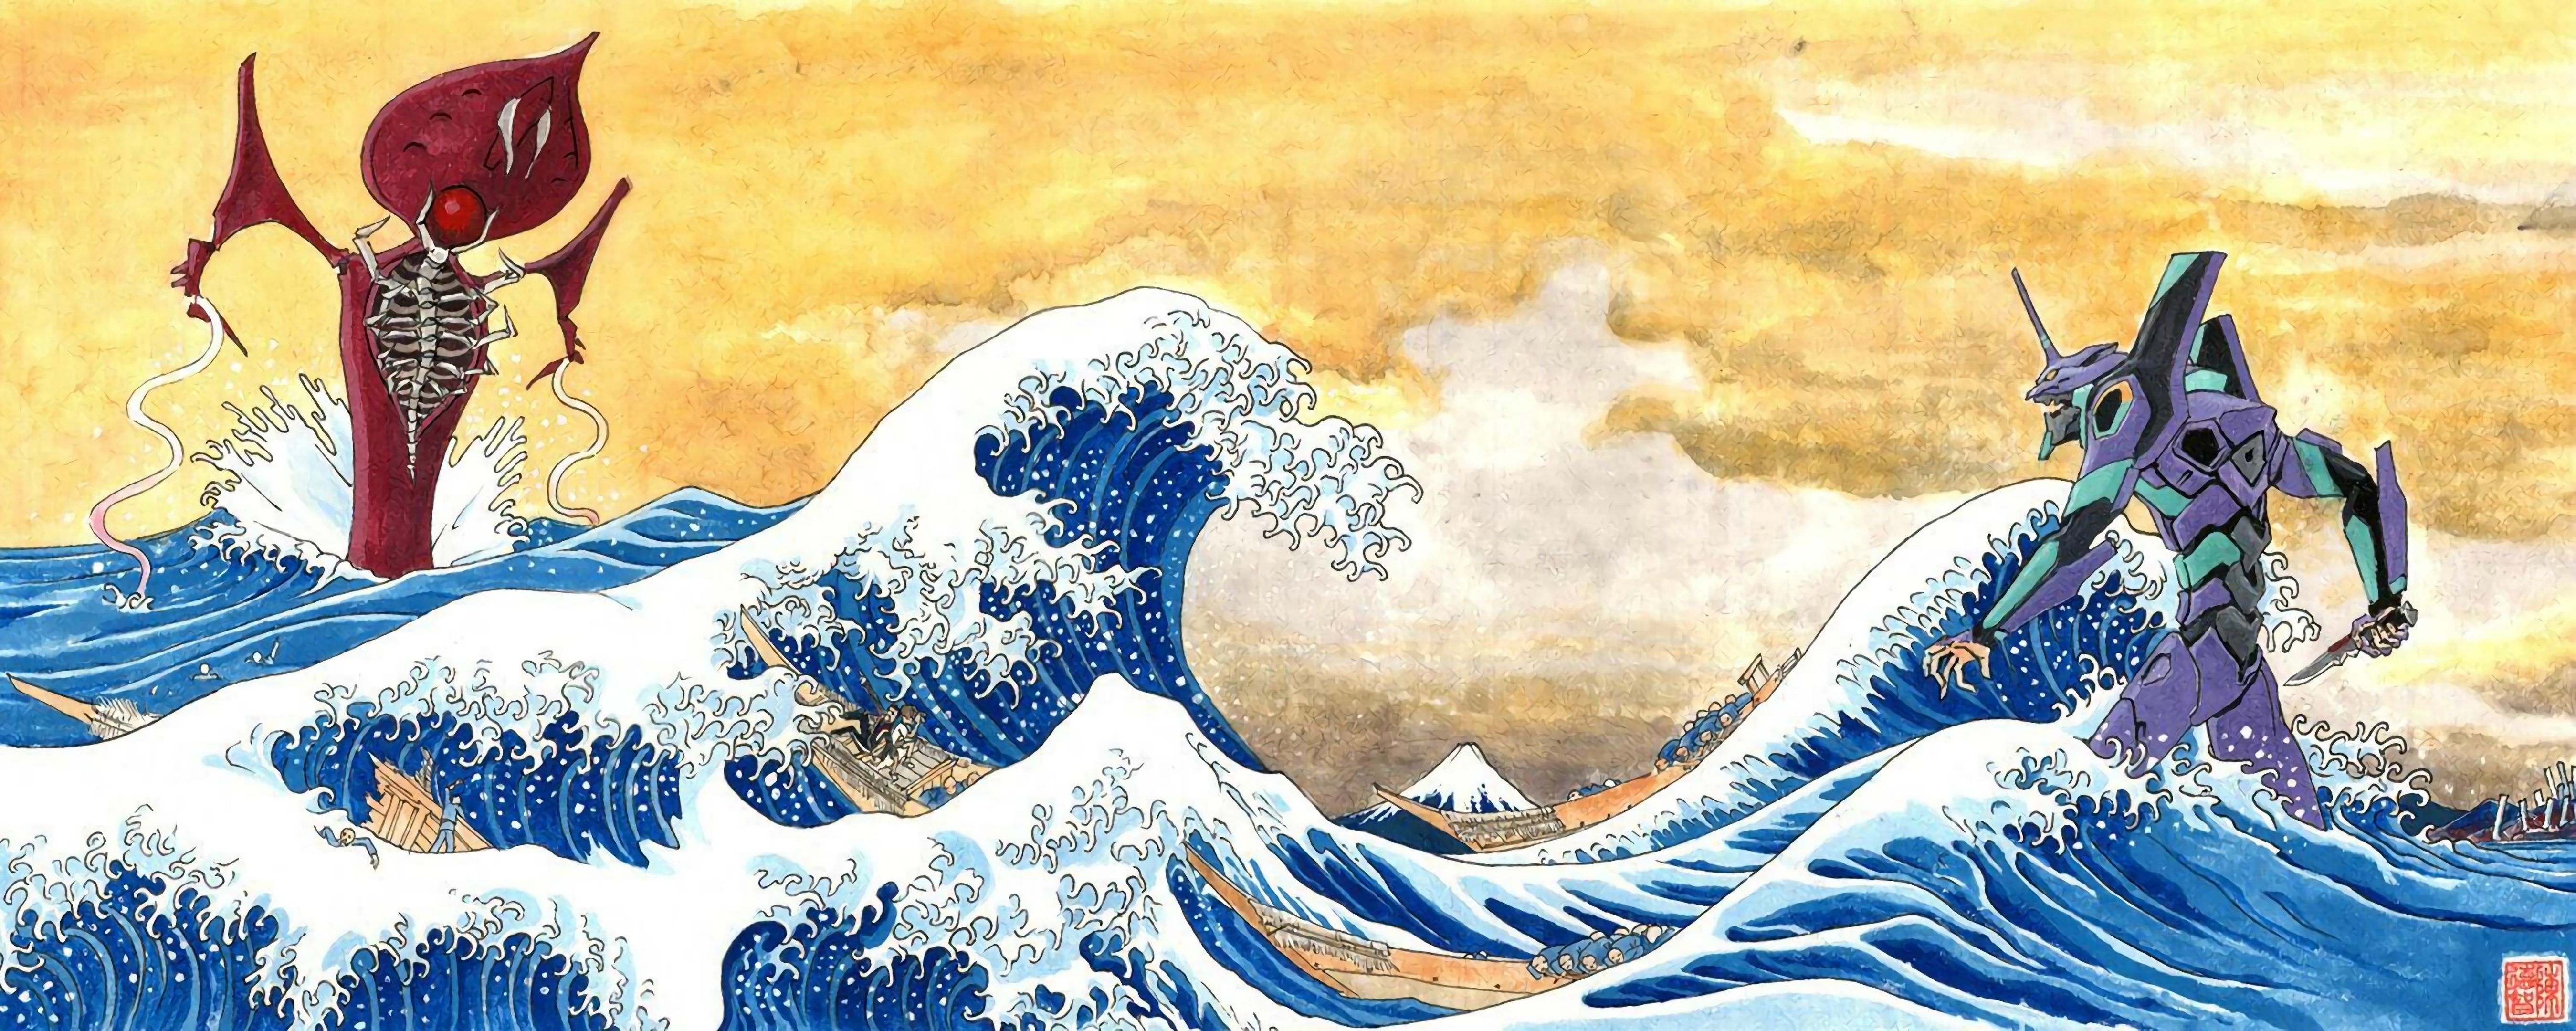 I Super Scaled That Quot Great Wave Off Kanagawa Meets